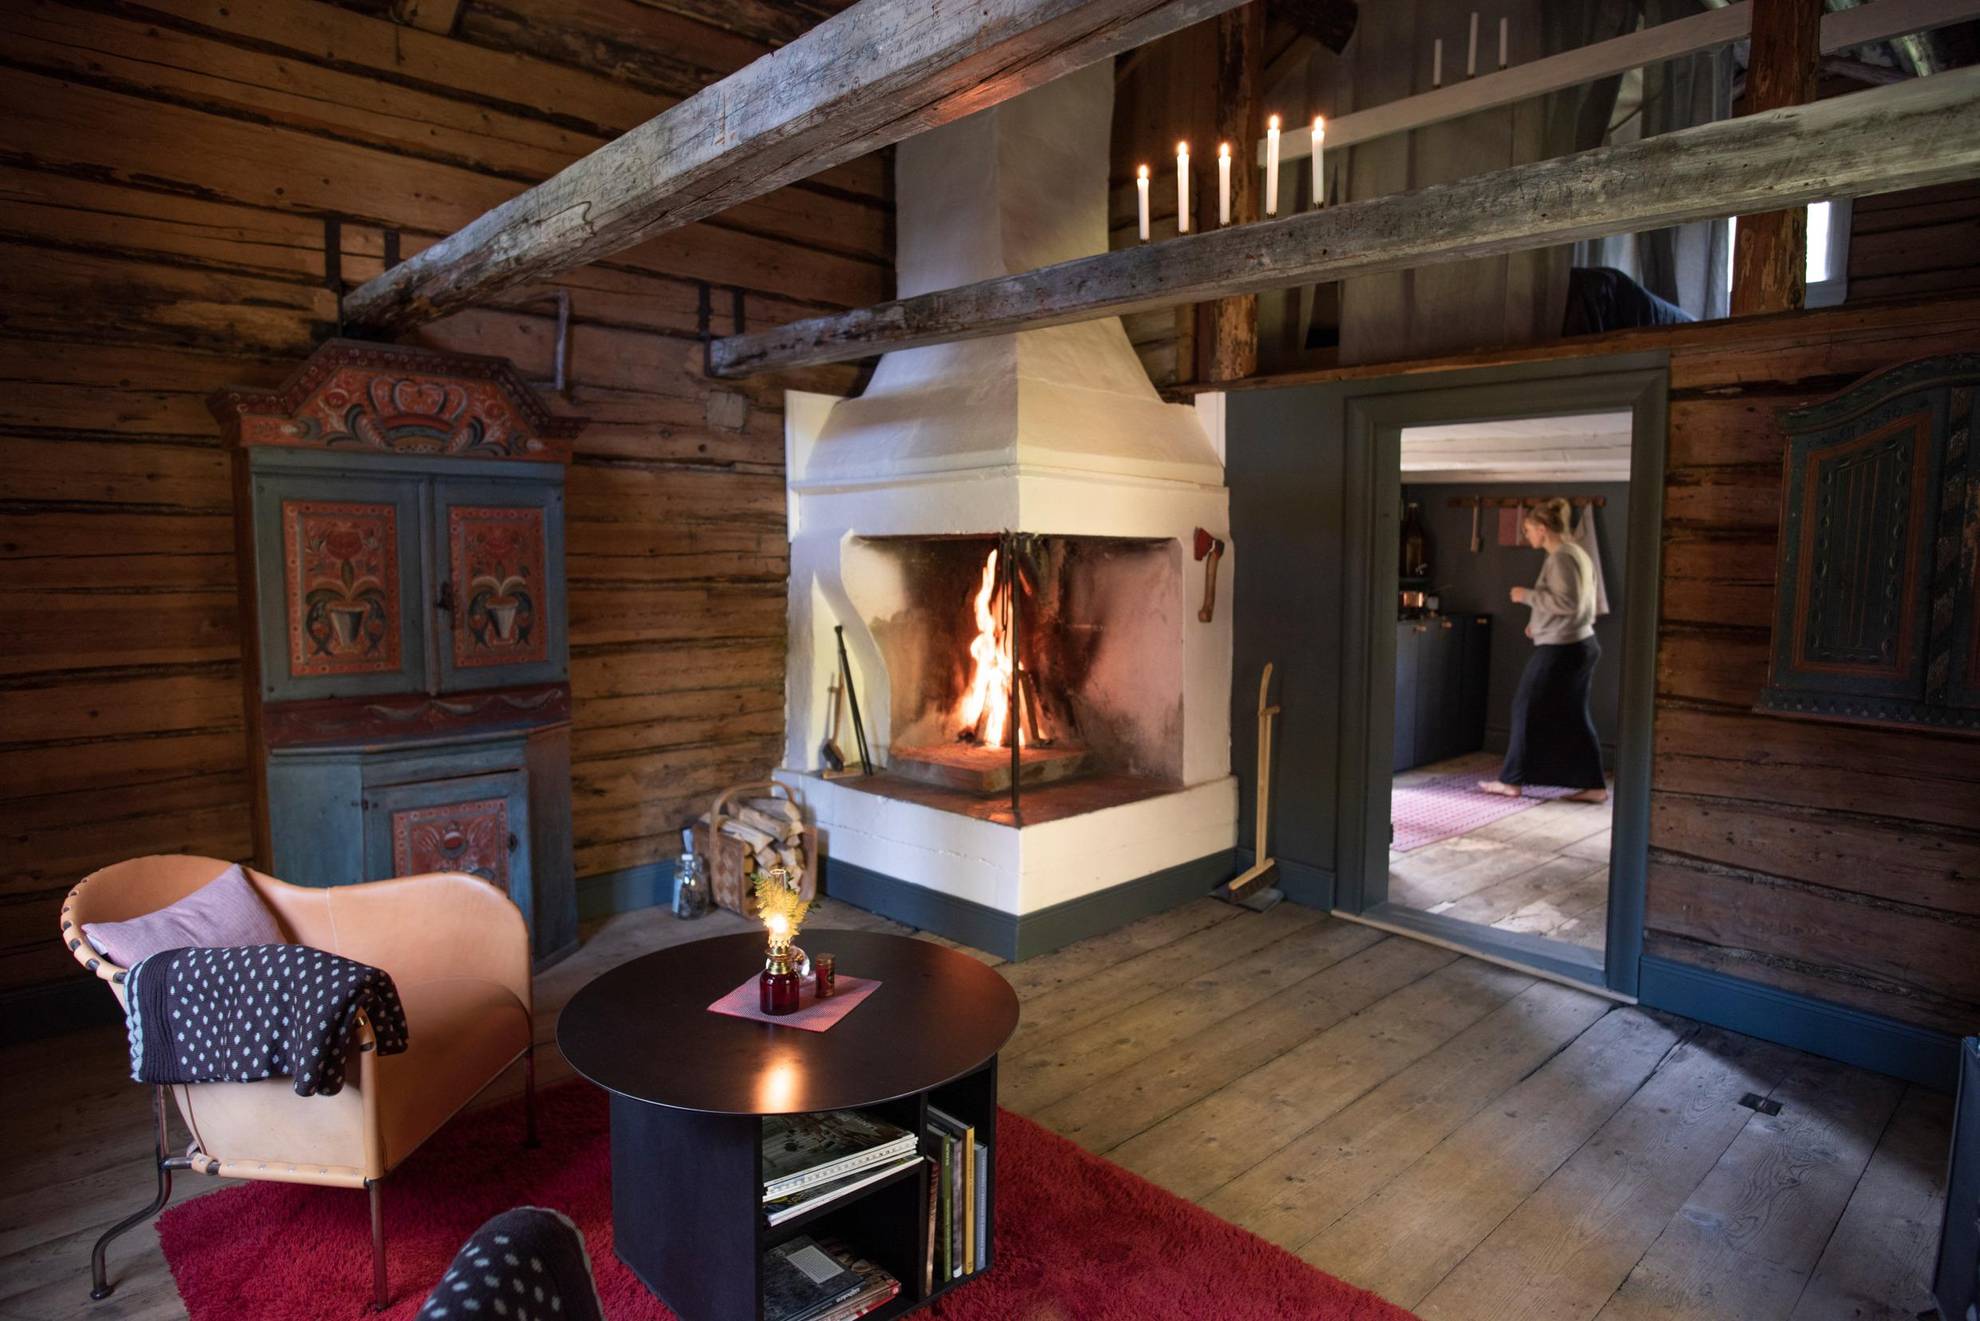 A fire burns in the hearth of an old wood cabin furnished with typical Hälsingland design as well as modern furniture, as you see a woman walking through the kitchen in the background.